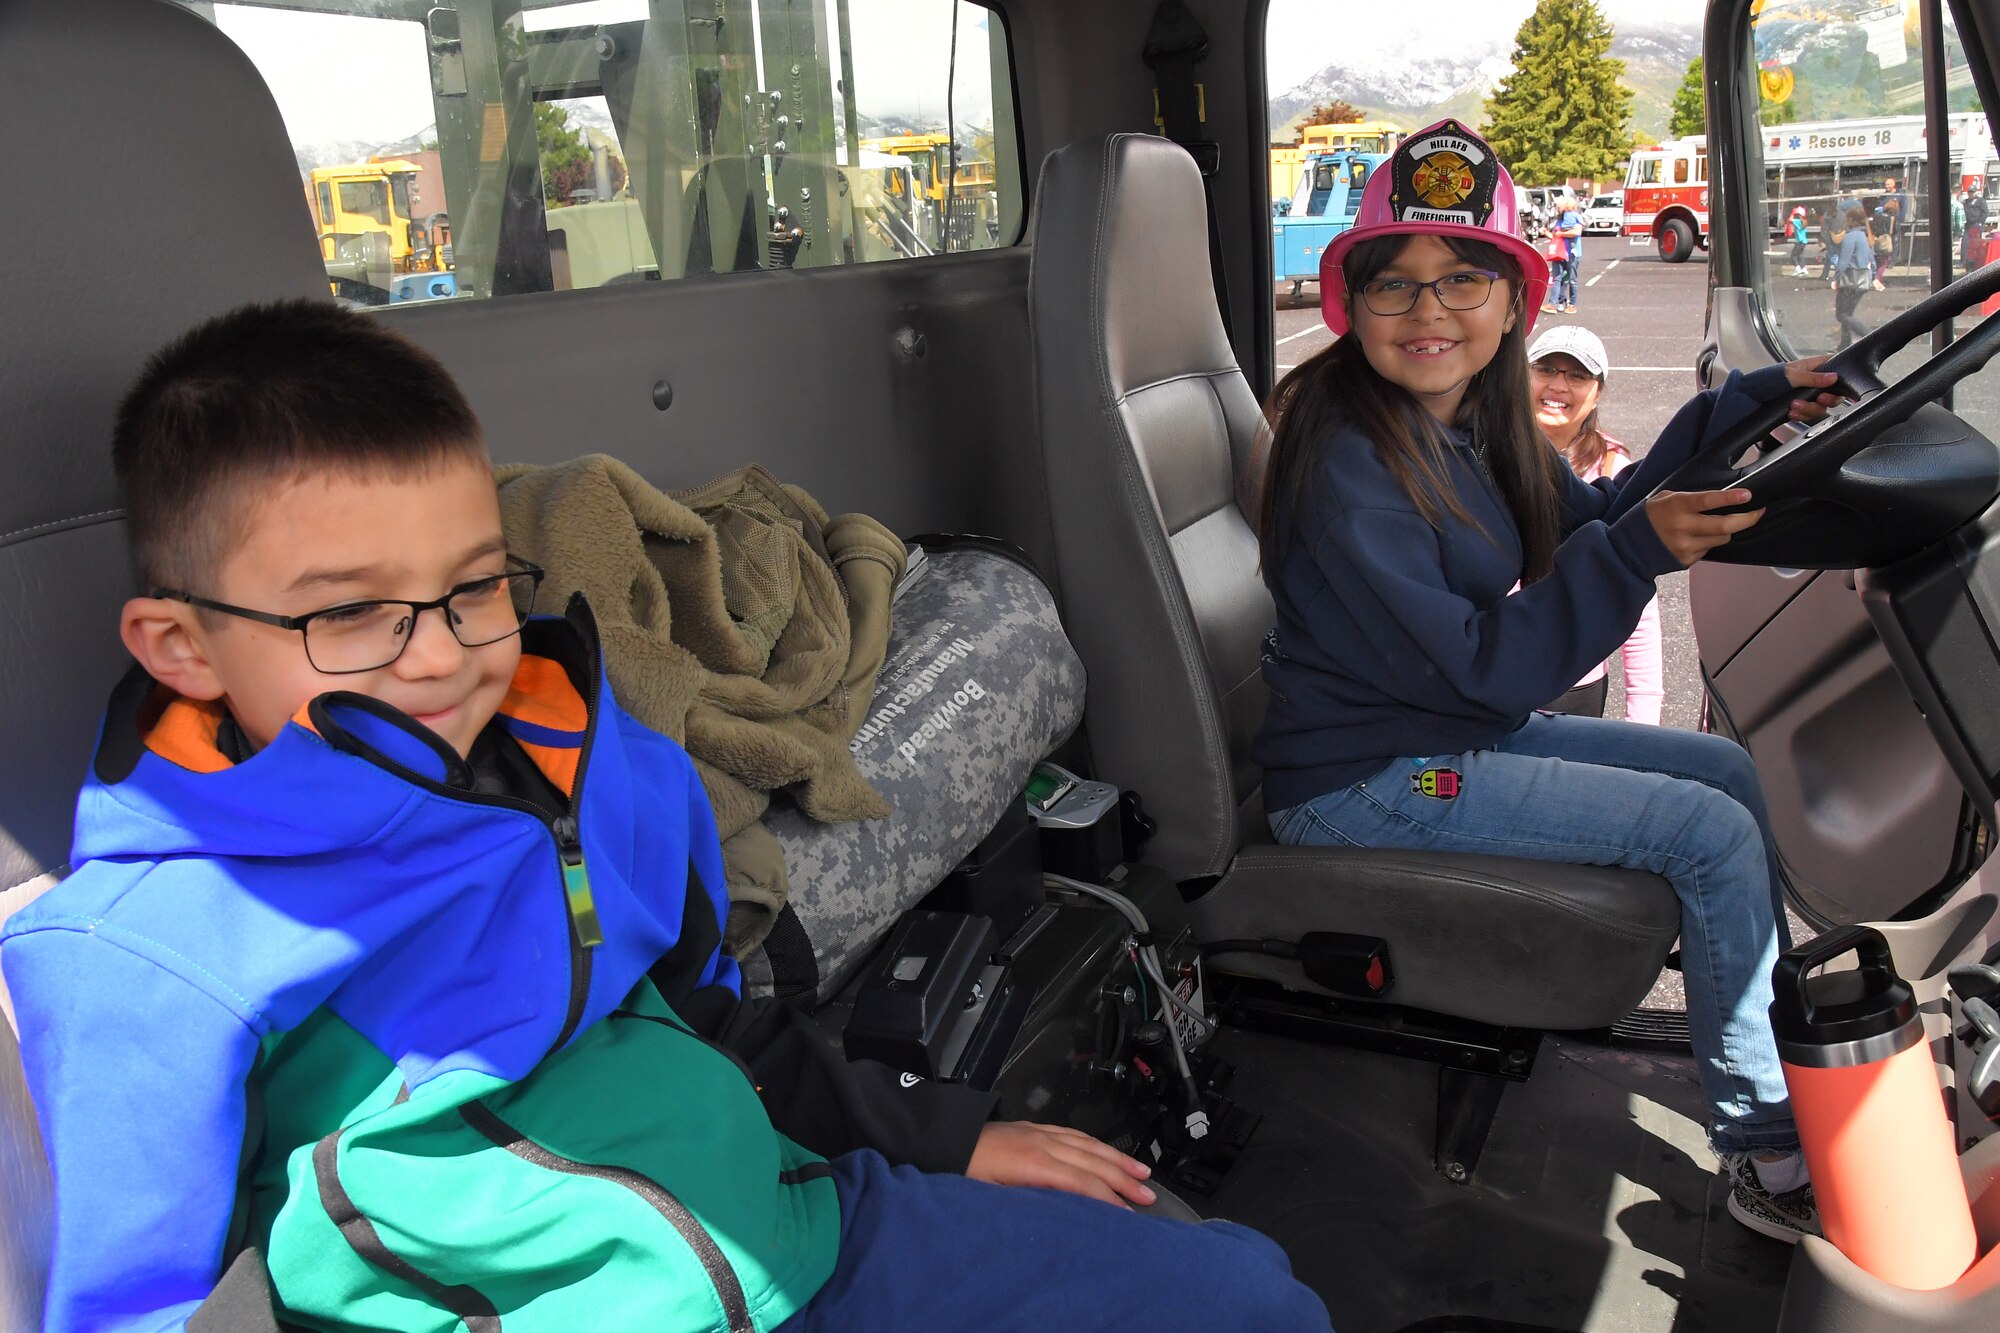 (left to right) Noah and Alina Saunders, enjoy sitting in the cab of a fuels truck at the Wheels of Wonder event, May 17, 2019, Hill Air Force Base, Utah. (U.S. Air Force photo by Todd Cromar)